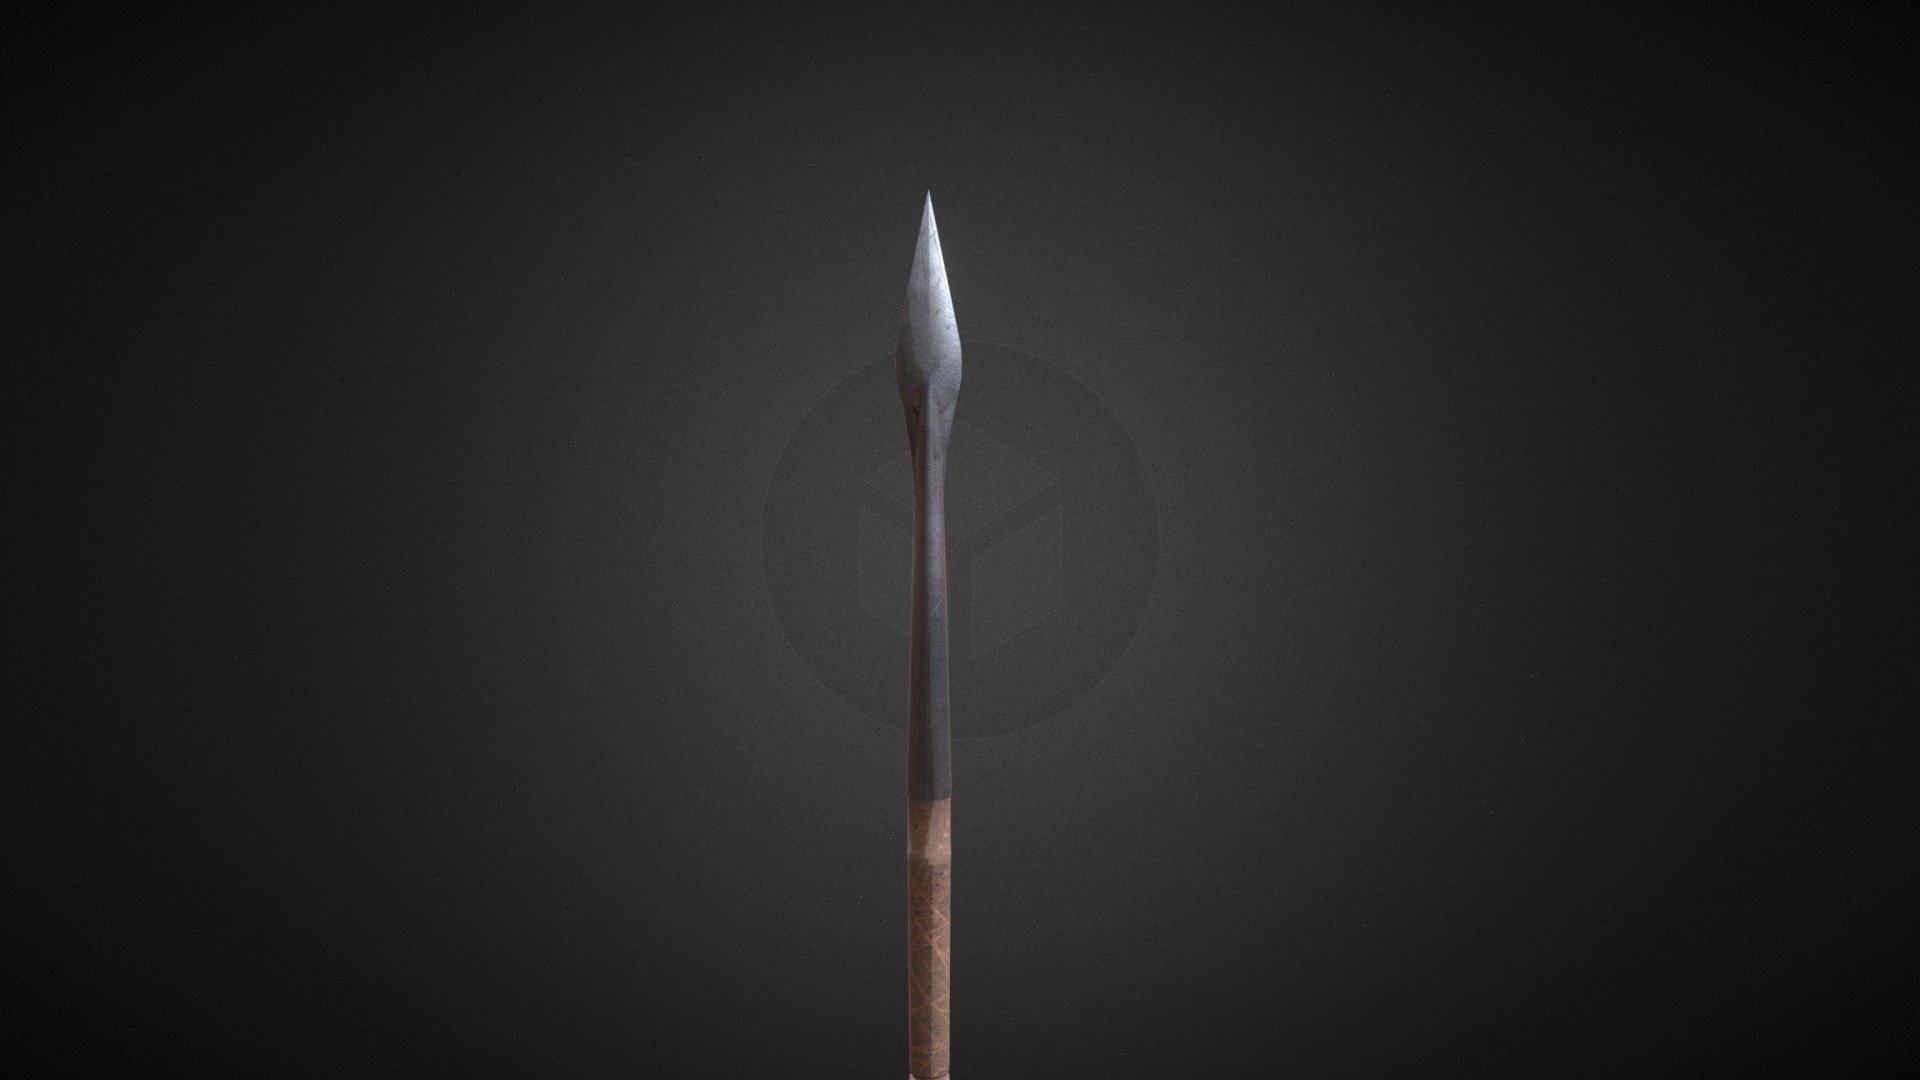 A medieval spear as used by a variety of different cultures from ancient up to medieval times. Can be used for viking, germanic themed games or documentaries.

Textures are 2K (2048x2048)

&ldquo;So Odin threw his spear Gungnir over the heads of the Vanir gods to make them resist the enemies attacks.